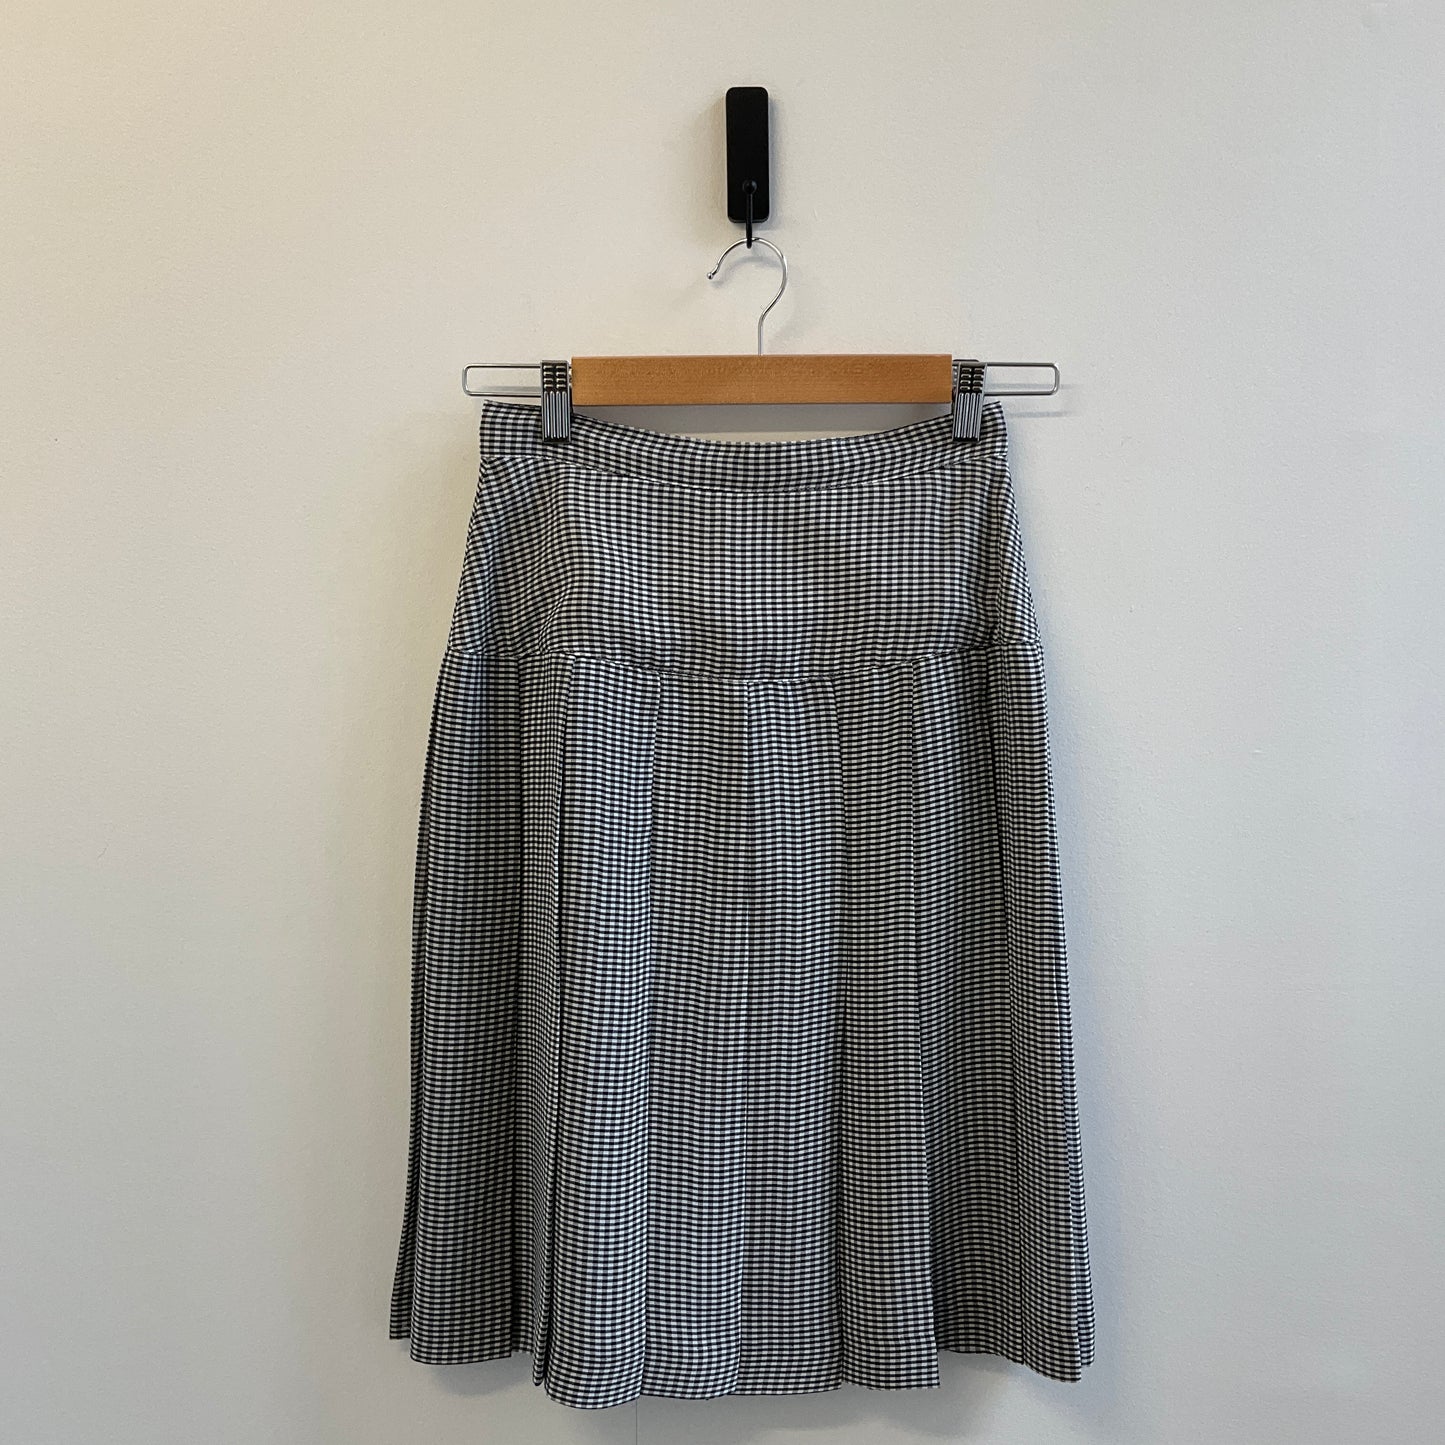 Suzanne Gregory - Skirt